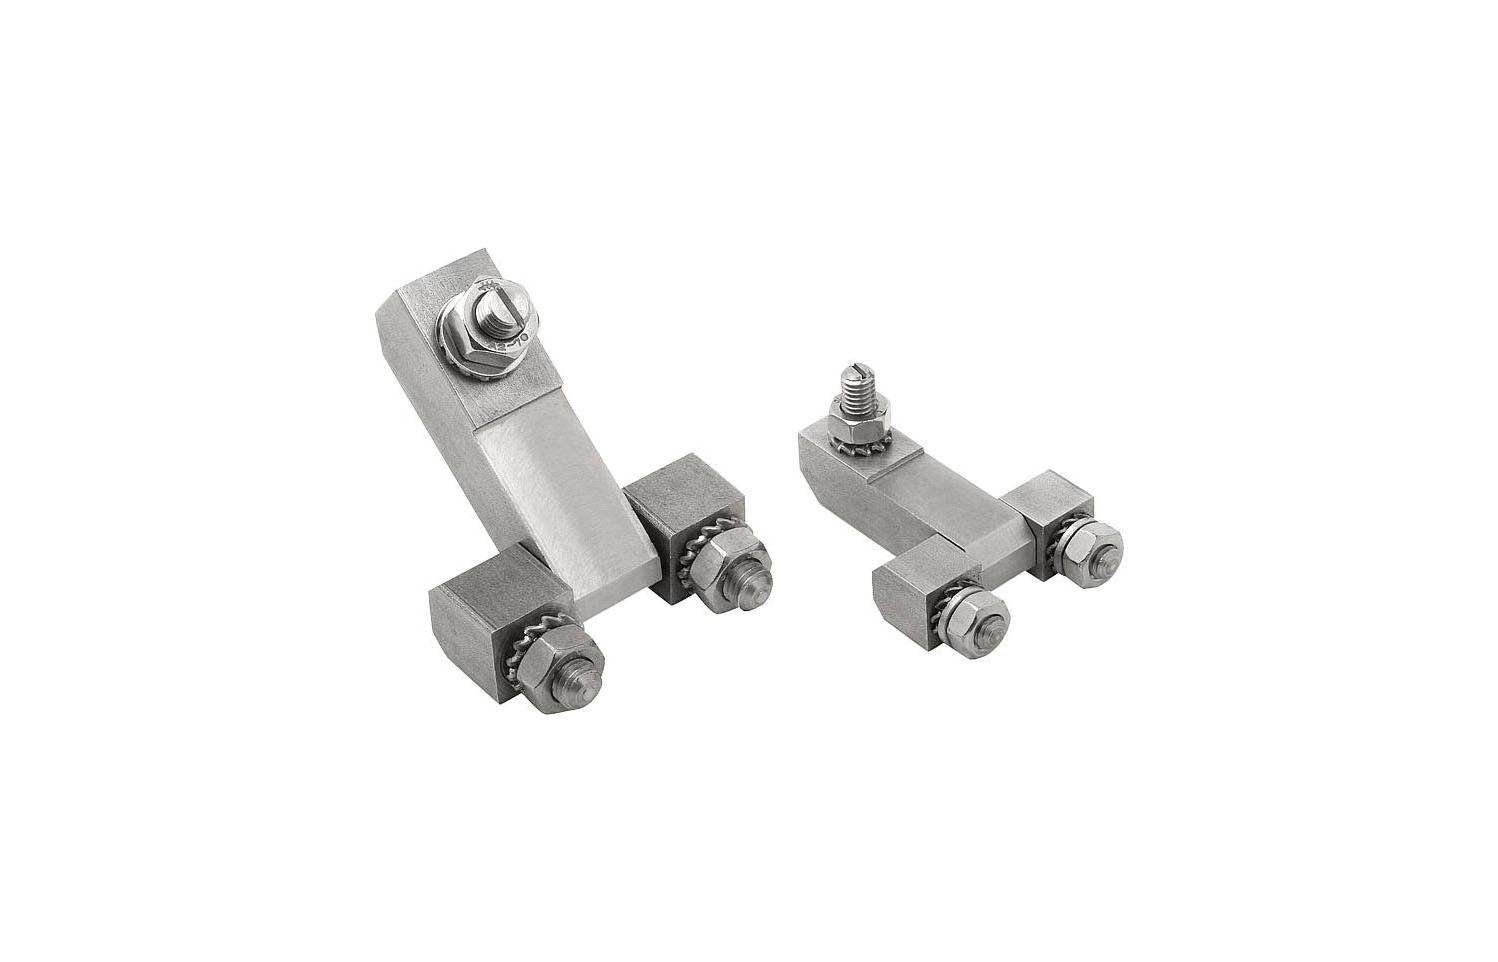 K1338_Block hinges with fastening nuts